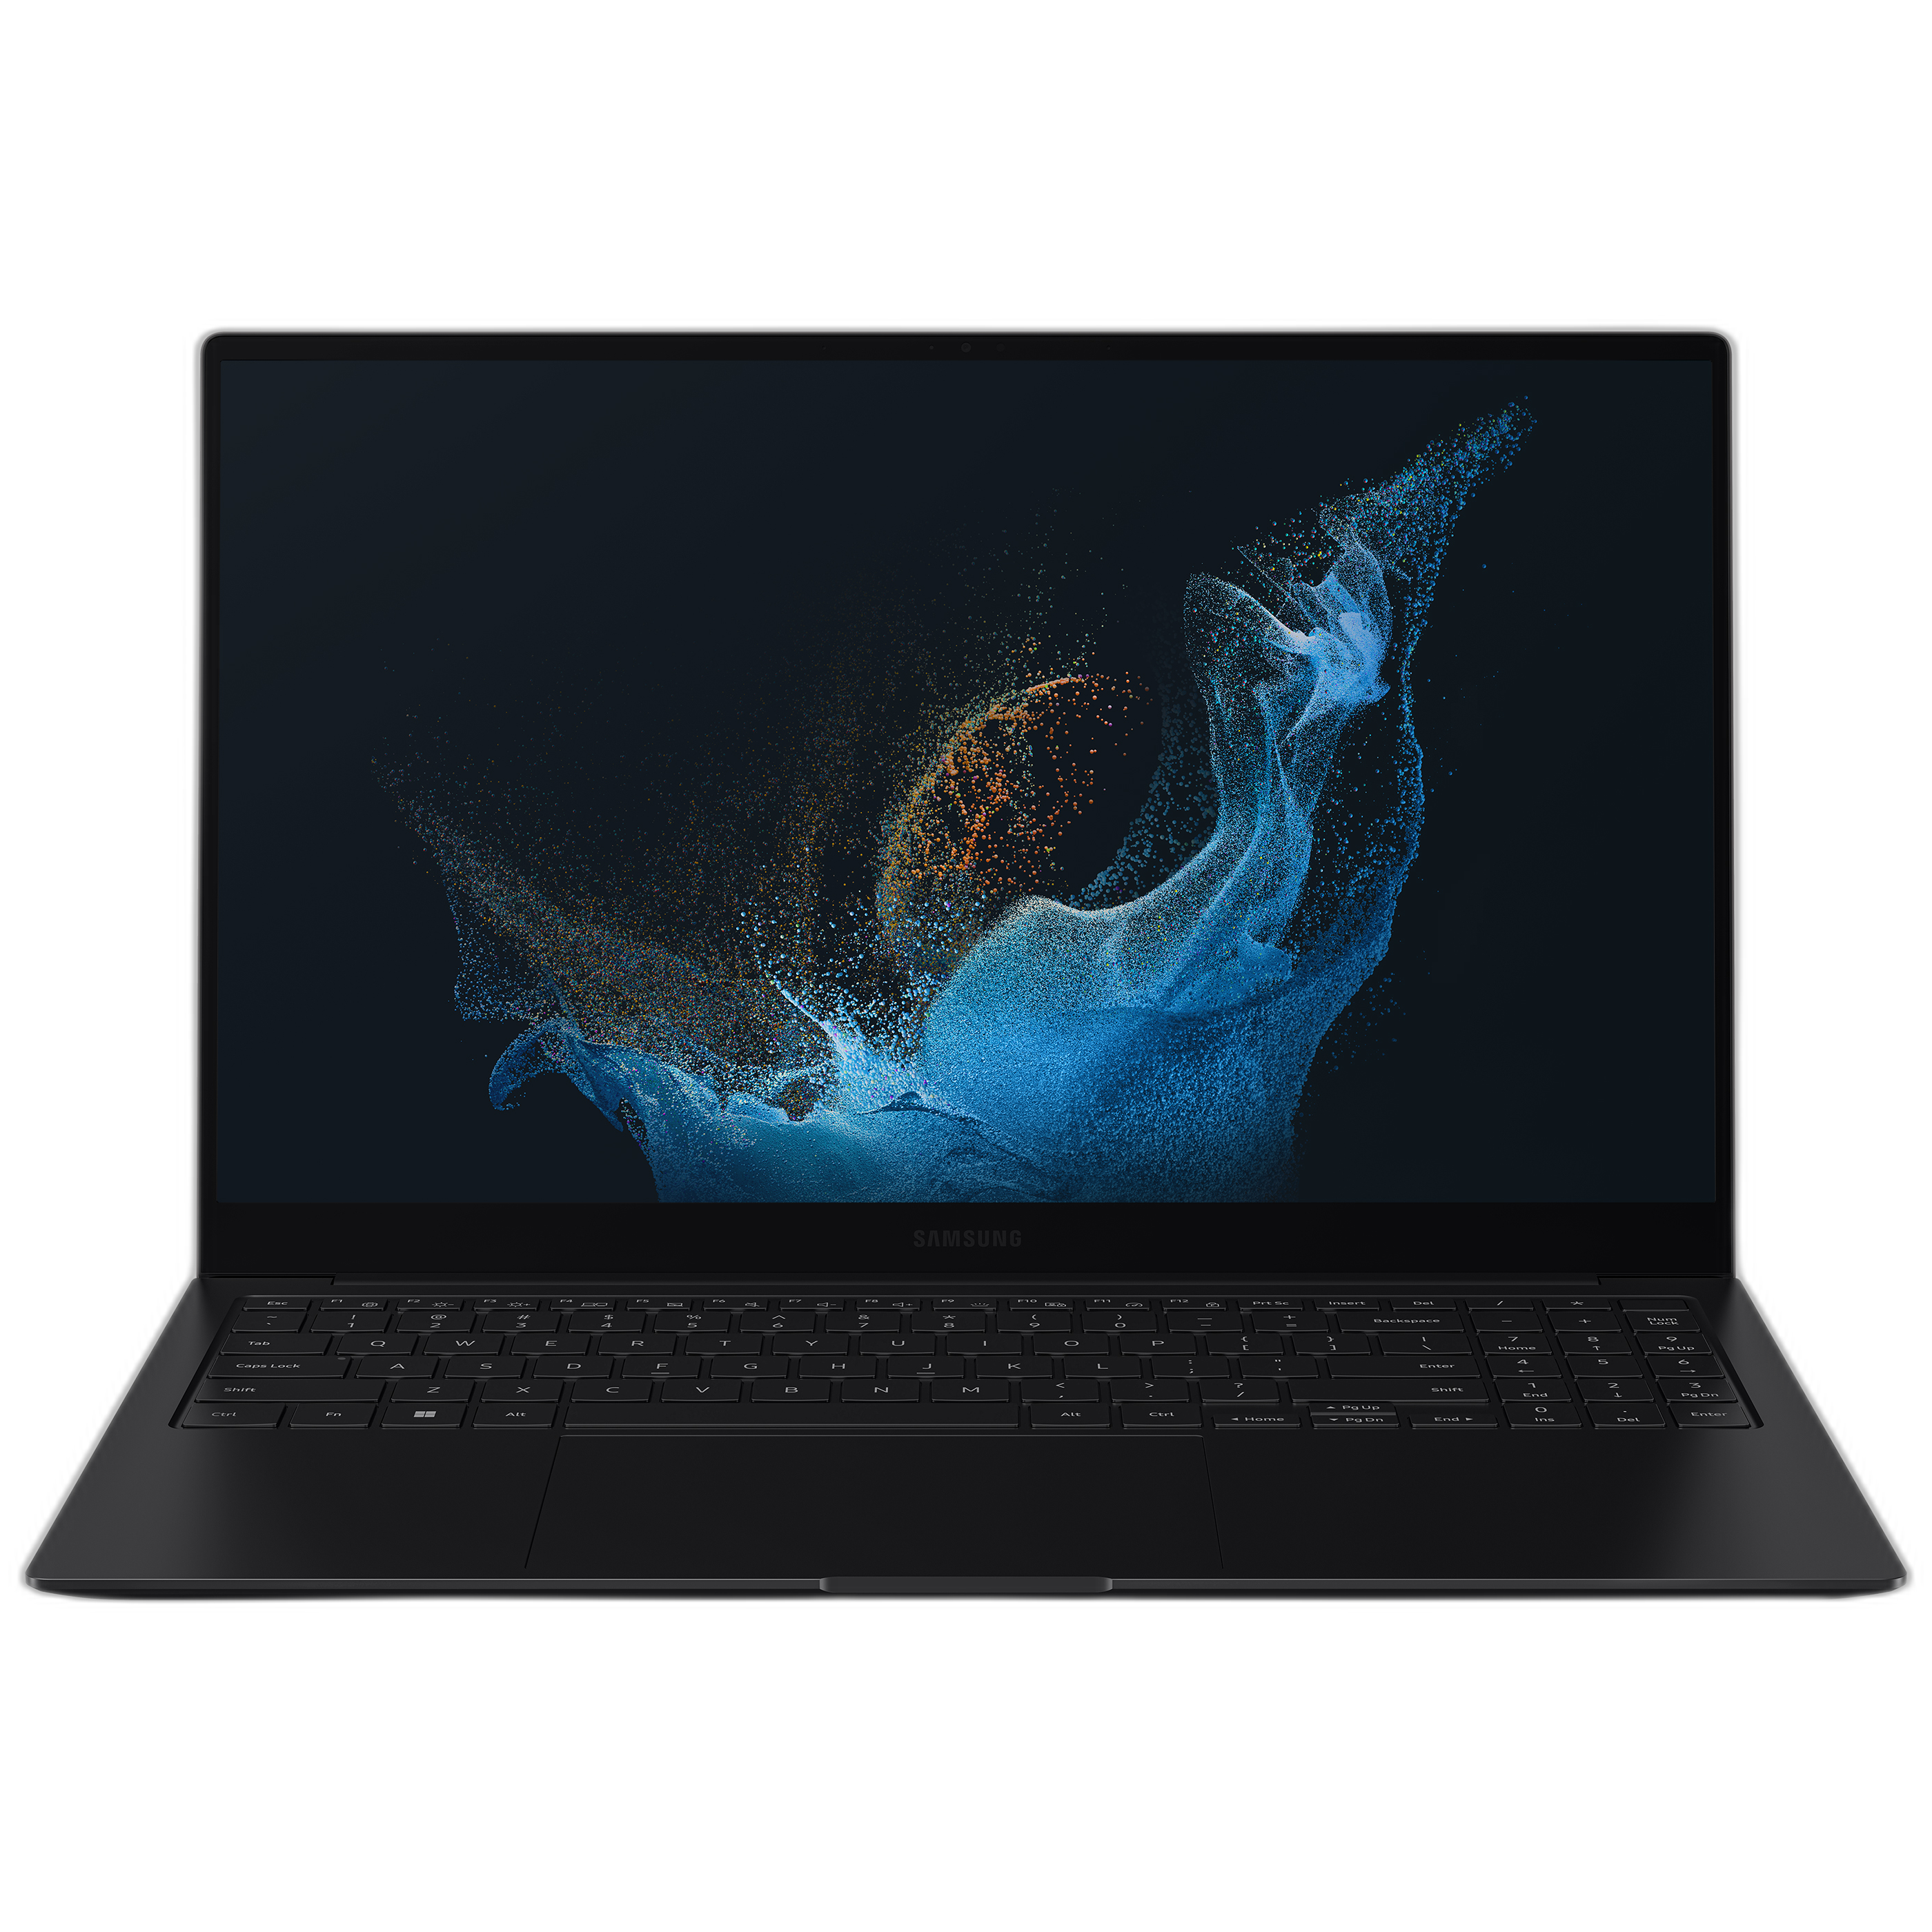 Front view of the Samsung Galaxy Book 2 Pro